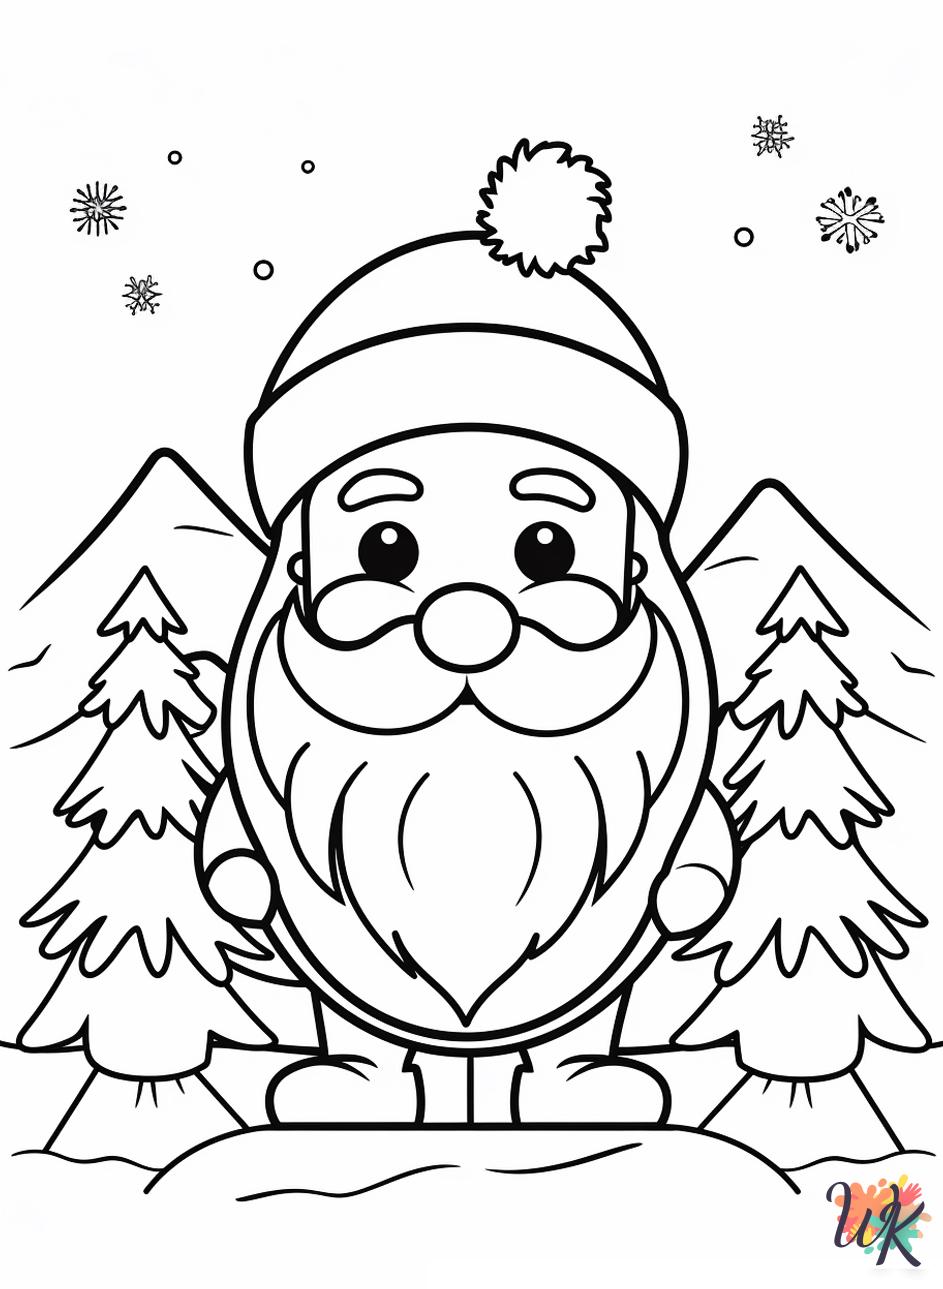 December printable coloring pages